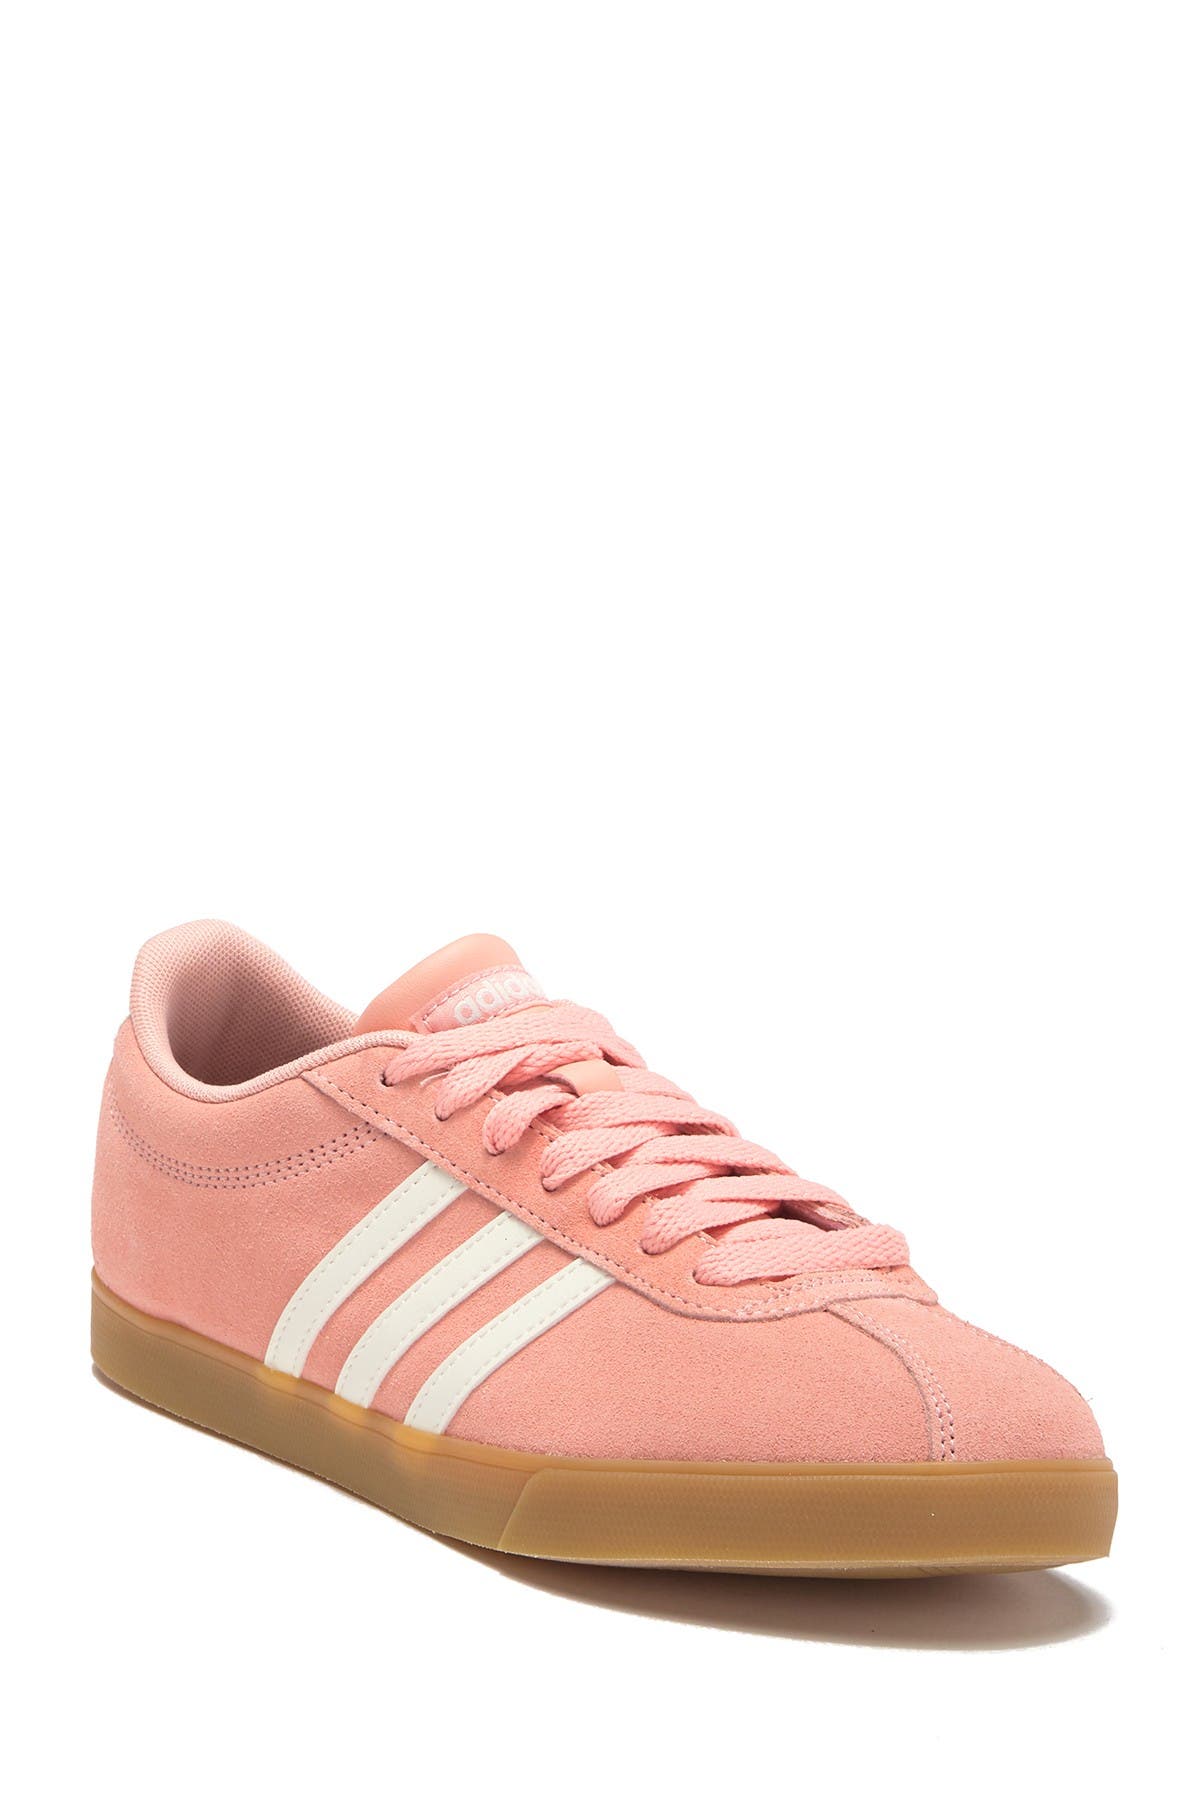 adidas courtset women's suede sneakers